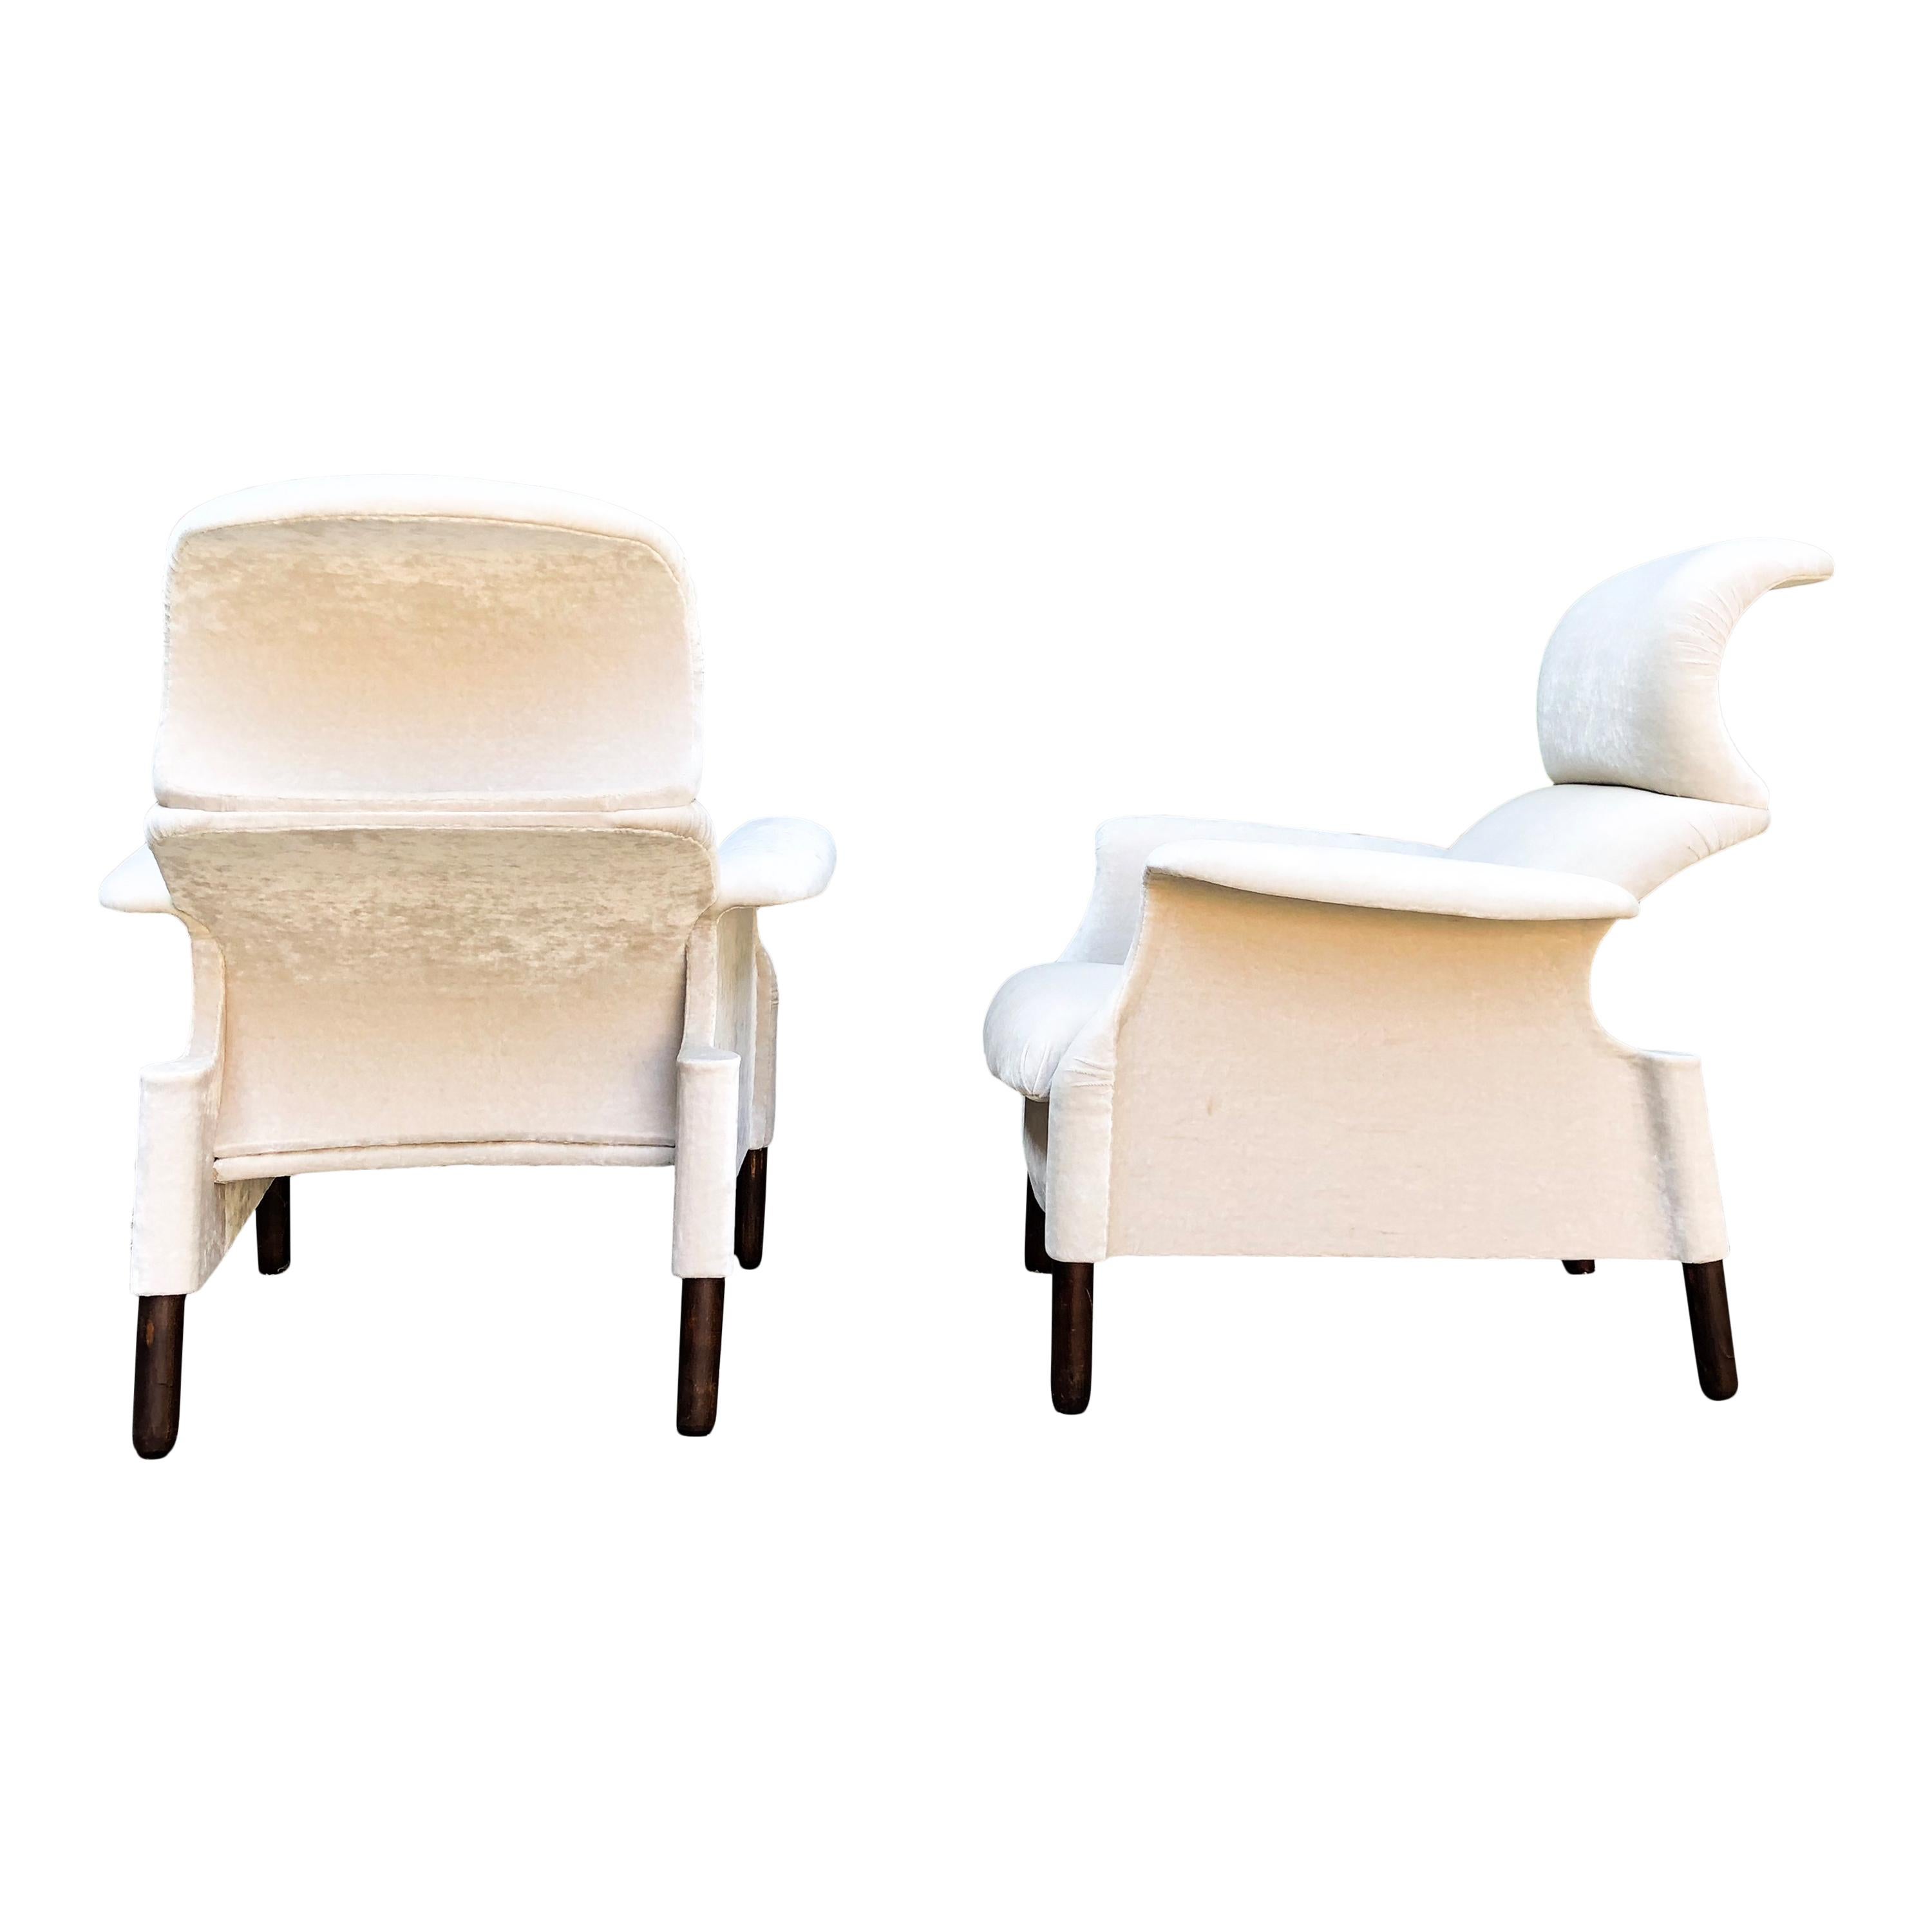 Pair of Sanluca armchairs dating back to the first Gavina SpA production, with the original beige velvet upholstery. Each armchair is made of separate wooden curved pieces connected by screws. Sanluca is the first result of deep collaboration and